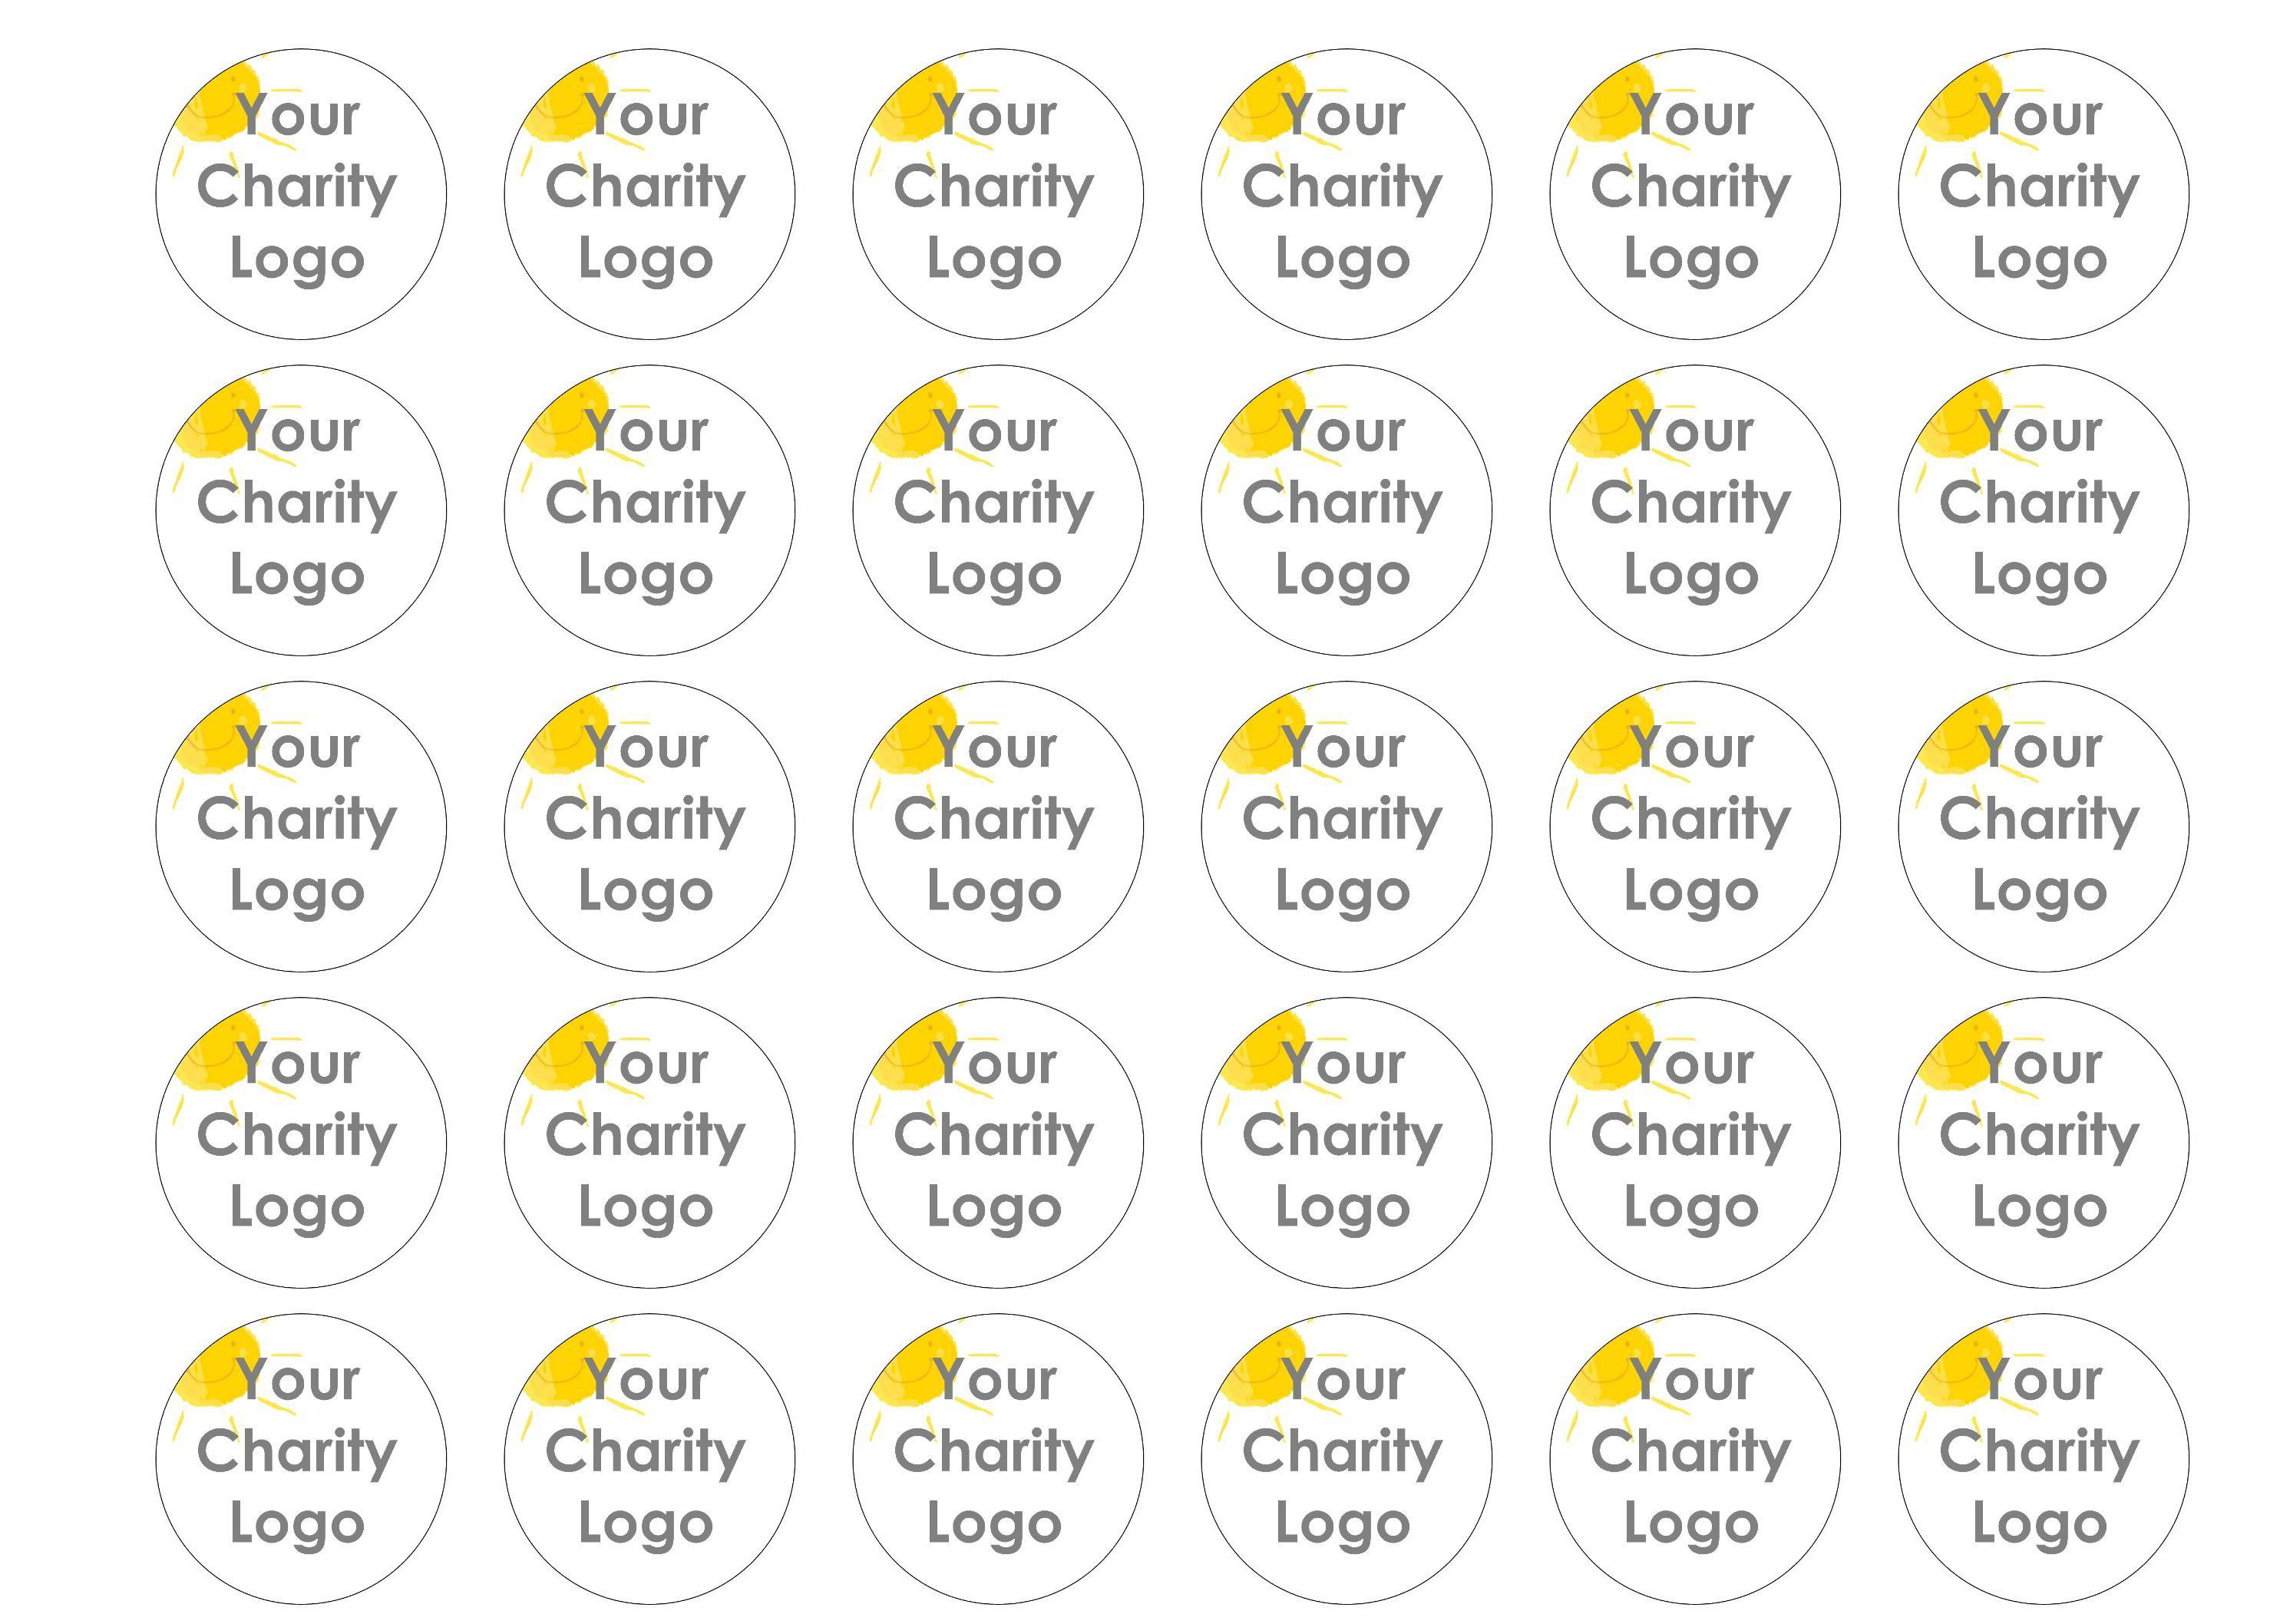 30 edible printed cake toppers with your charity logo